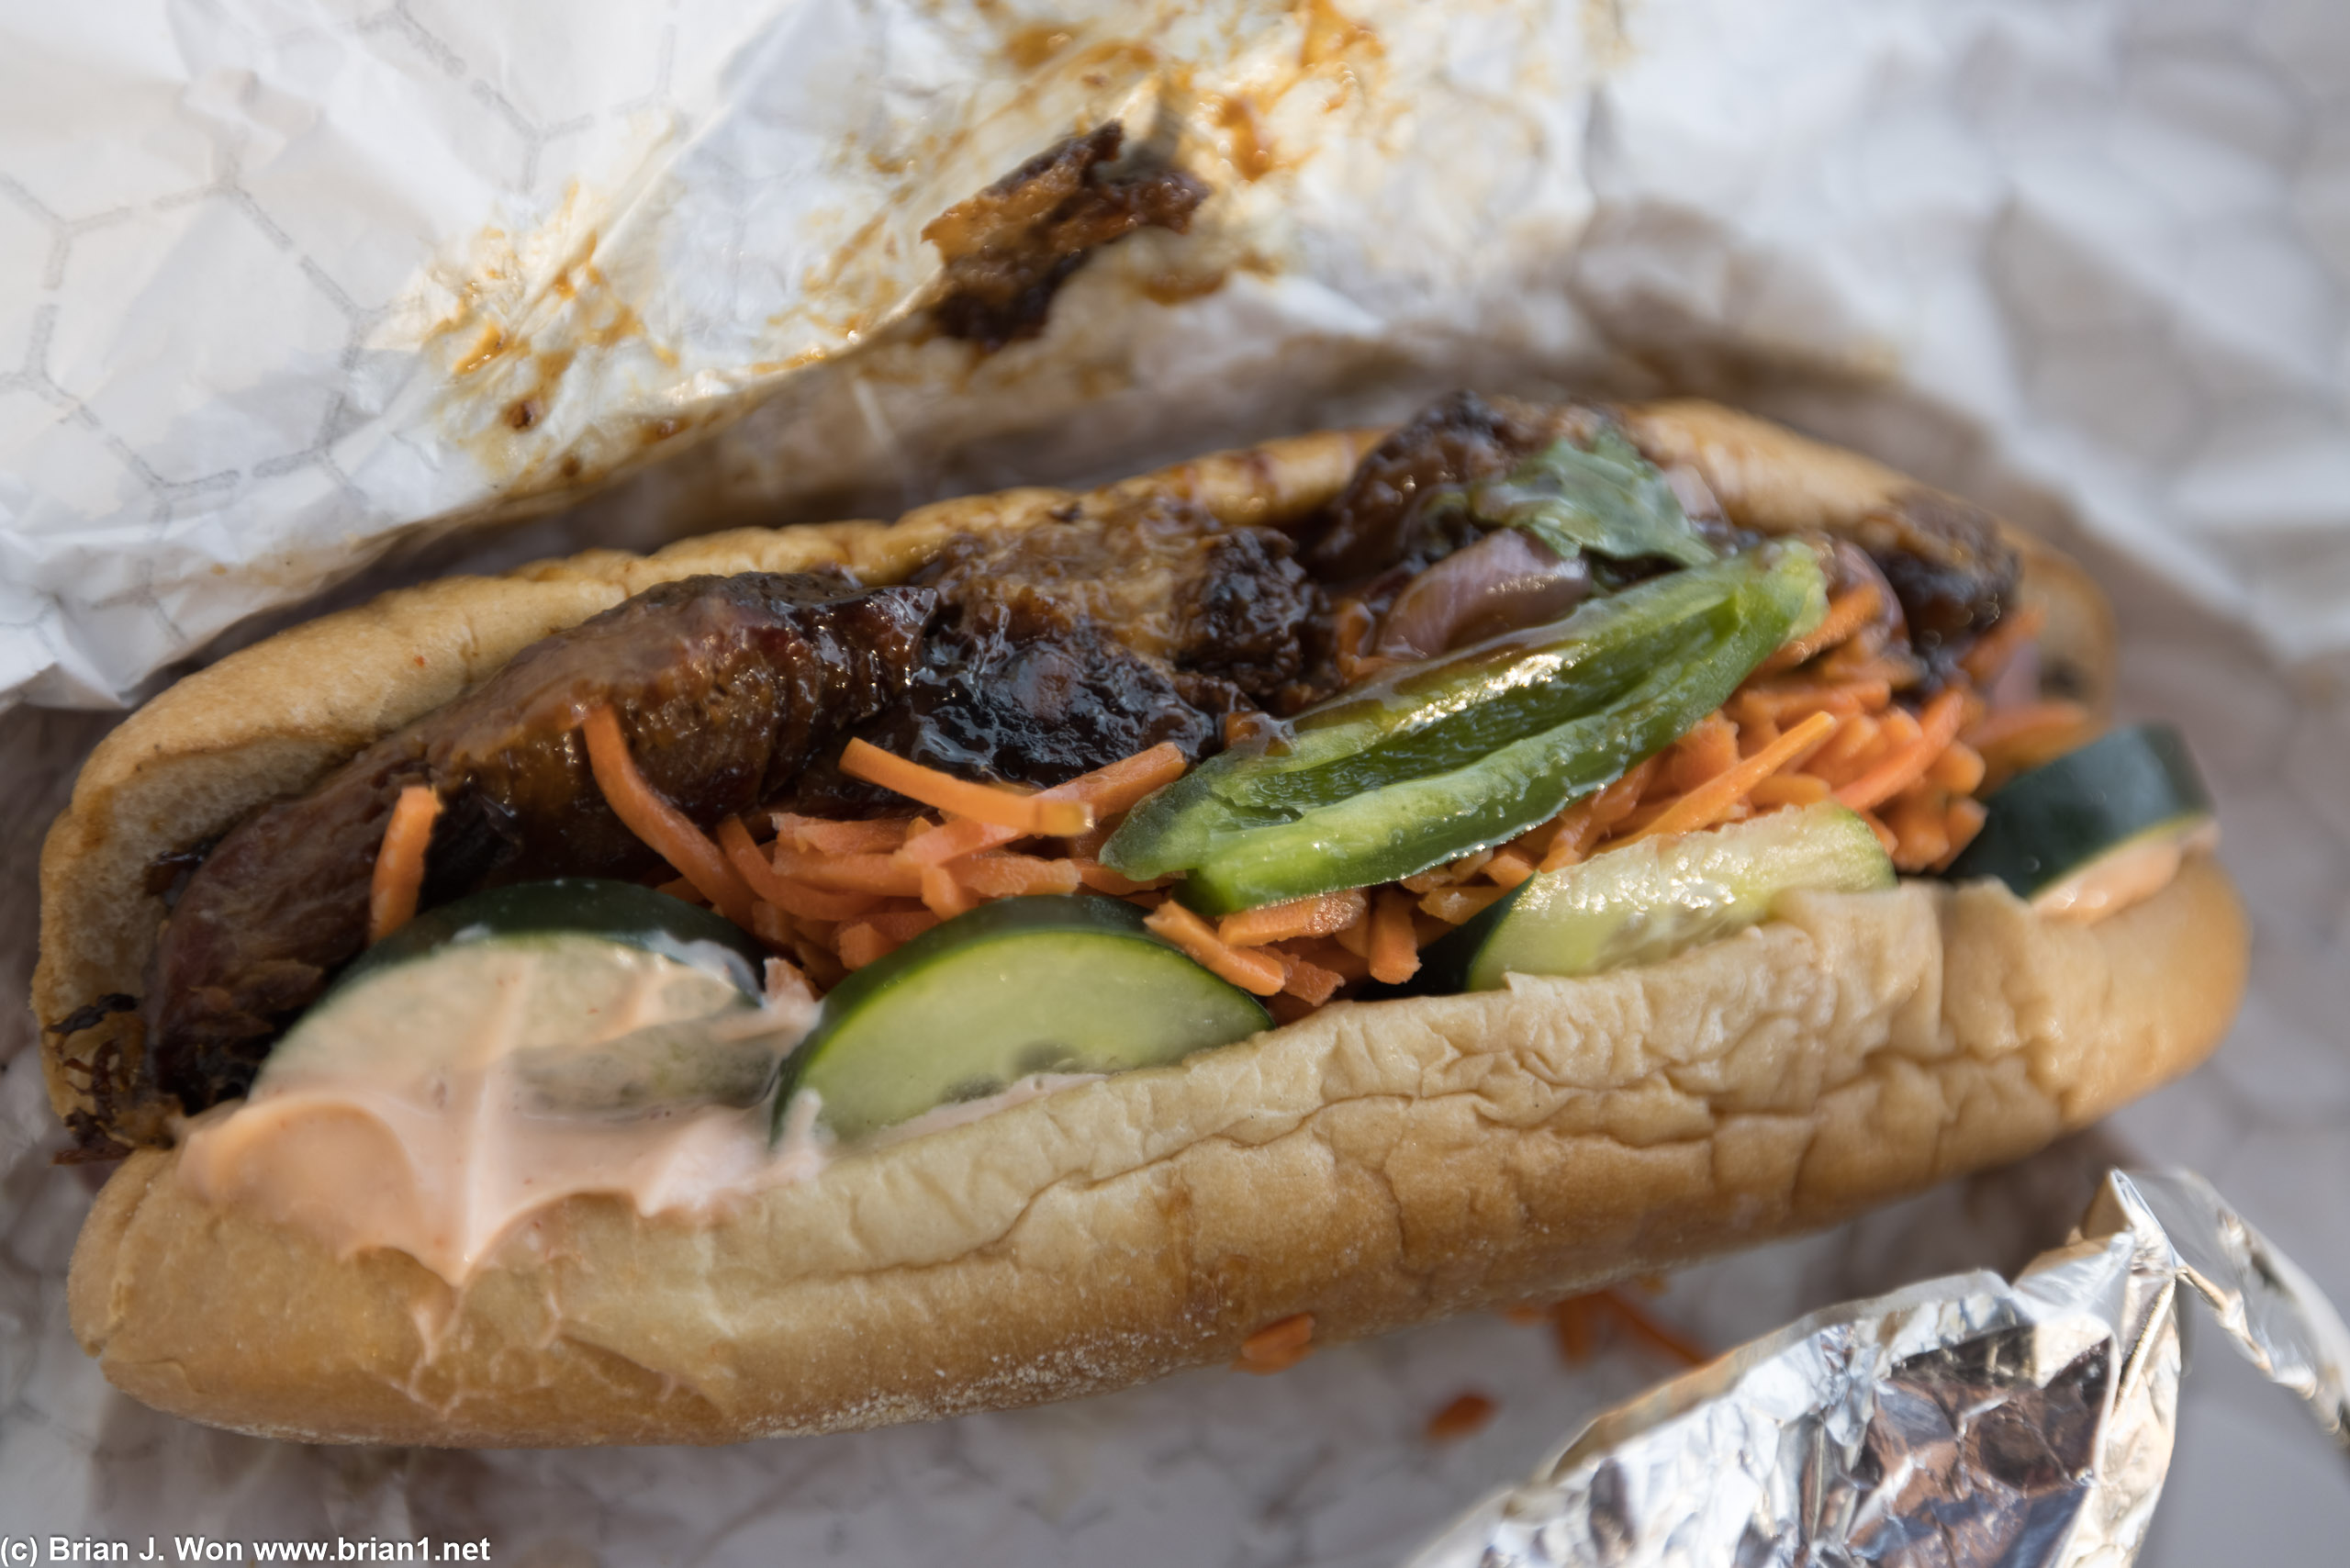 Overcooked, dry, nearly inedible pork in the banh mi. Sauce and veggies are all EXACTLY the same as in the poke.